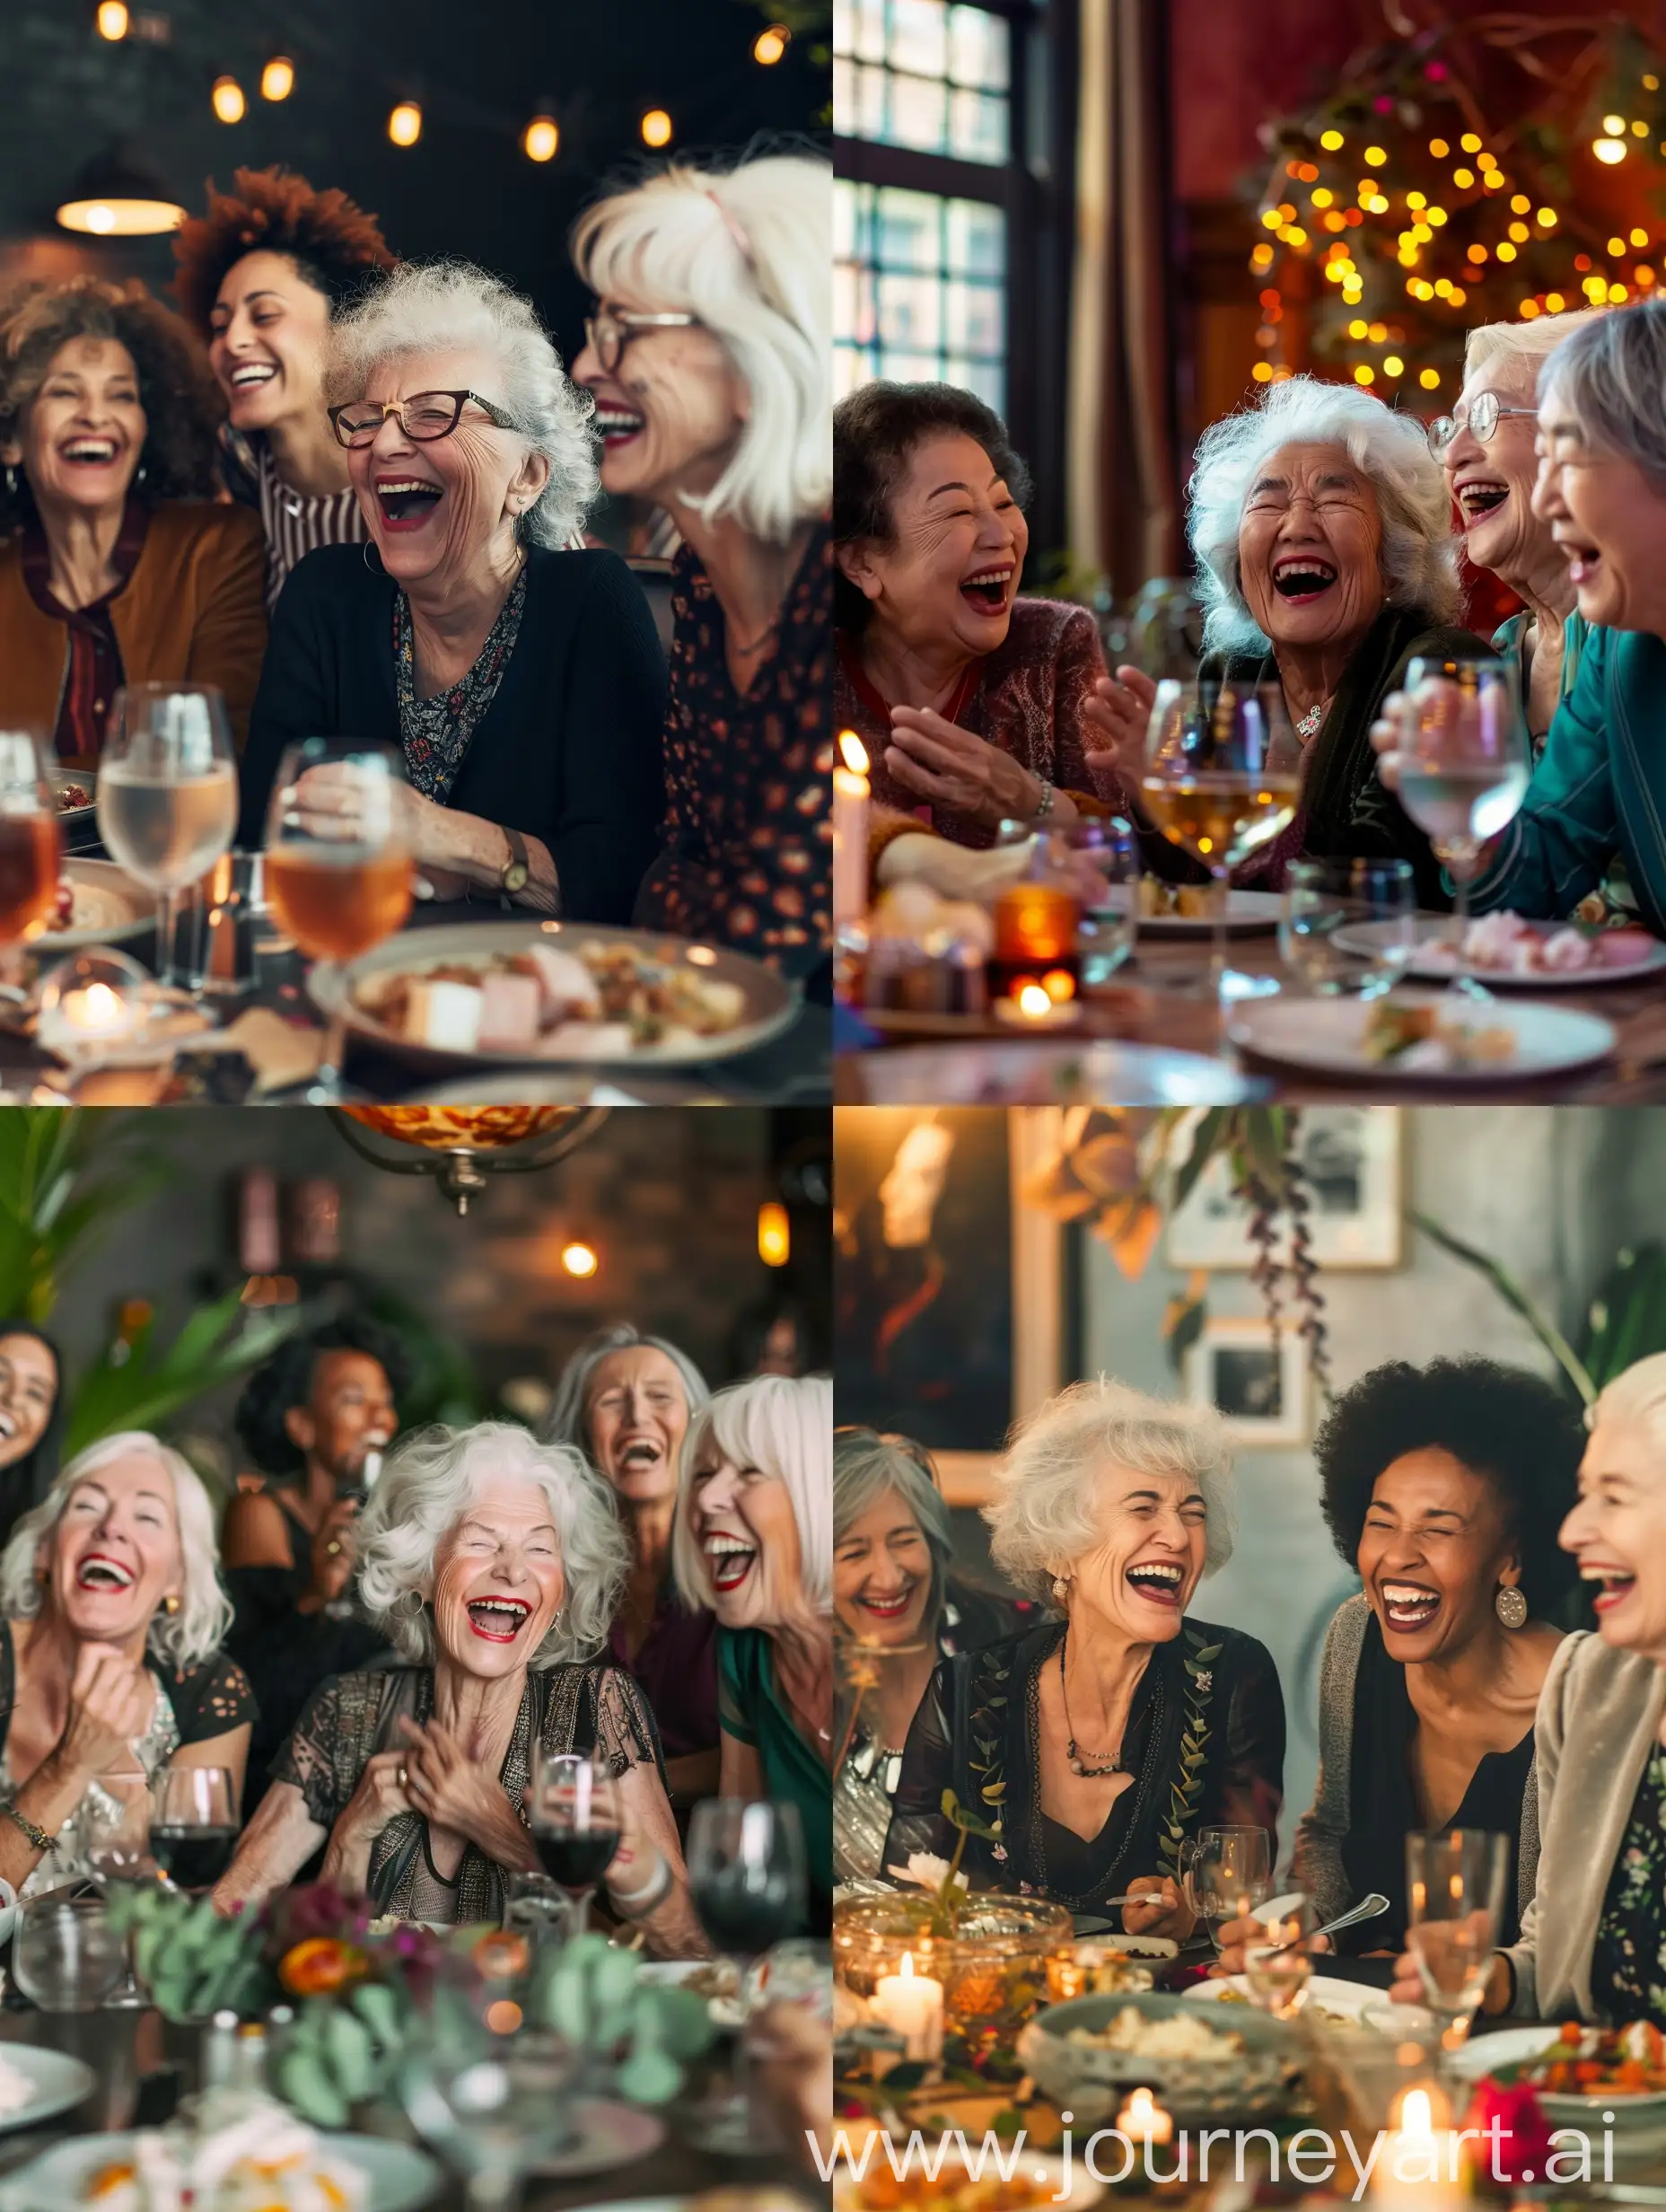 Generate a photo of a group of diverse, joyful older female friends laughing and celebrating together at a dinner party, capturing the spirit of camaraderie and empowerment on International Women's Day.